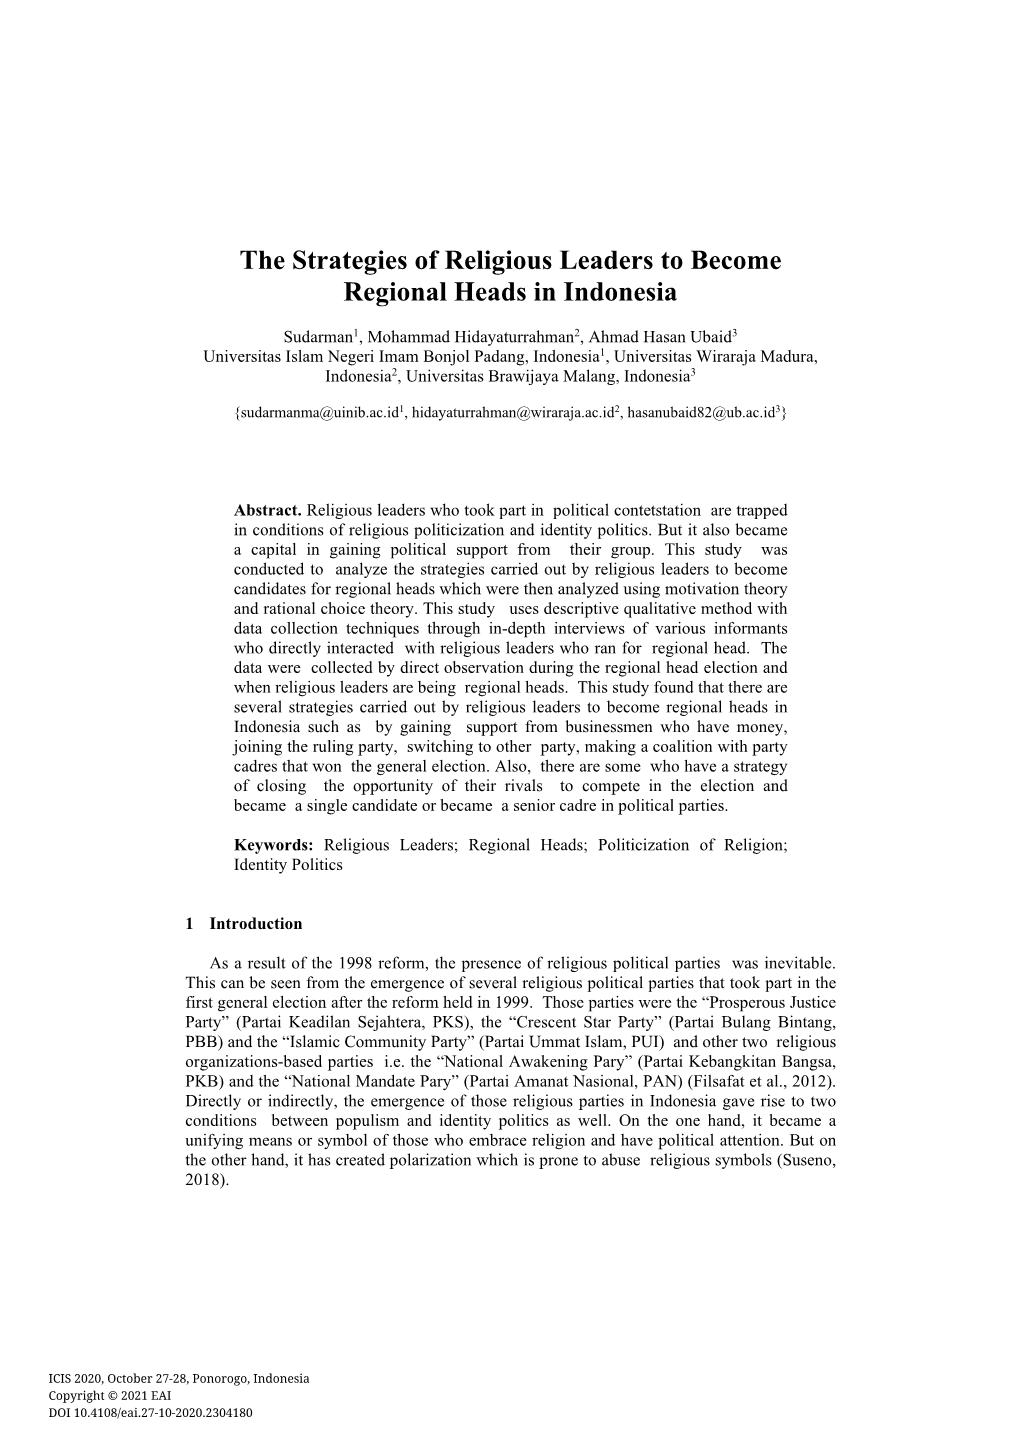 The Strategies of Religious Leaders to Become Regional Heads in Indonesia